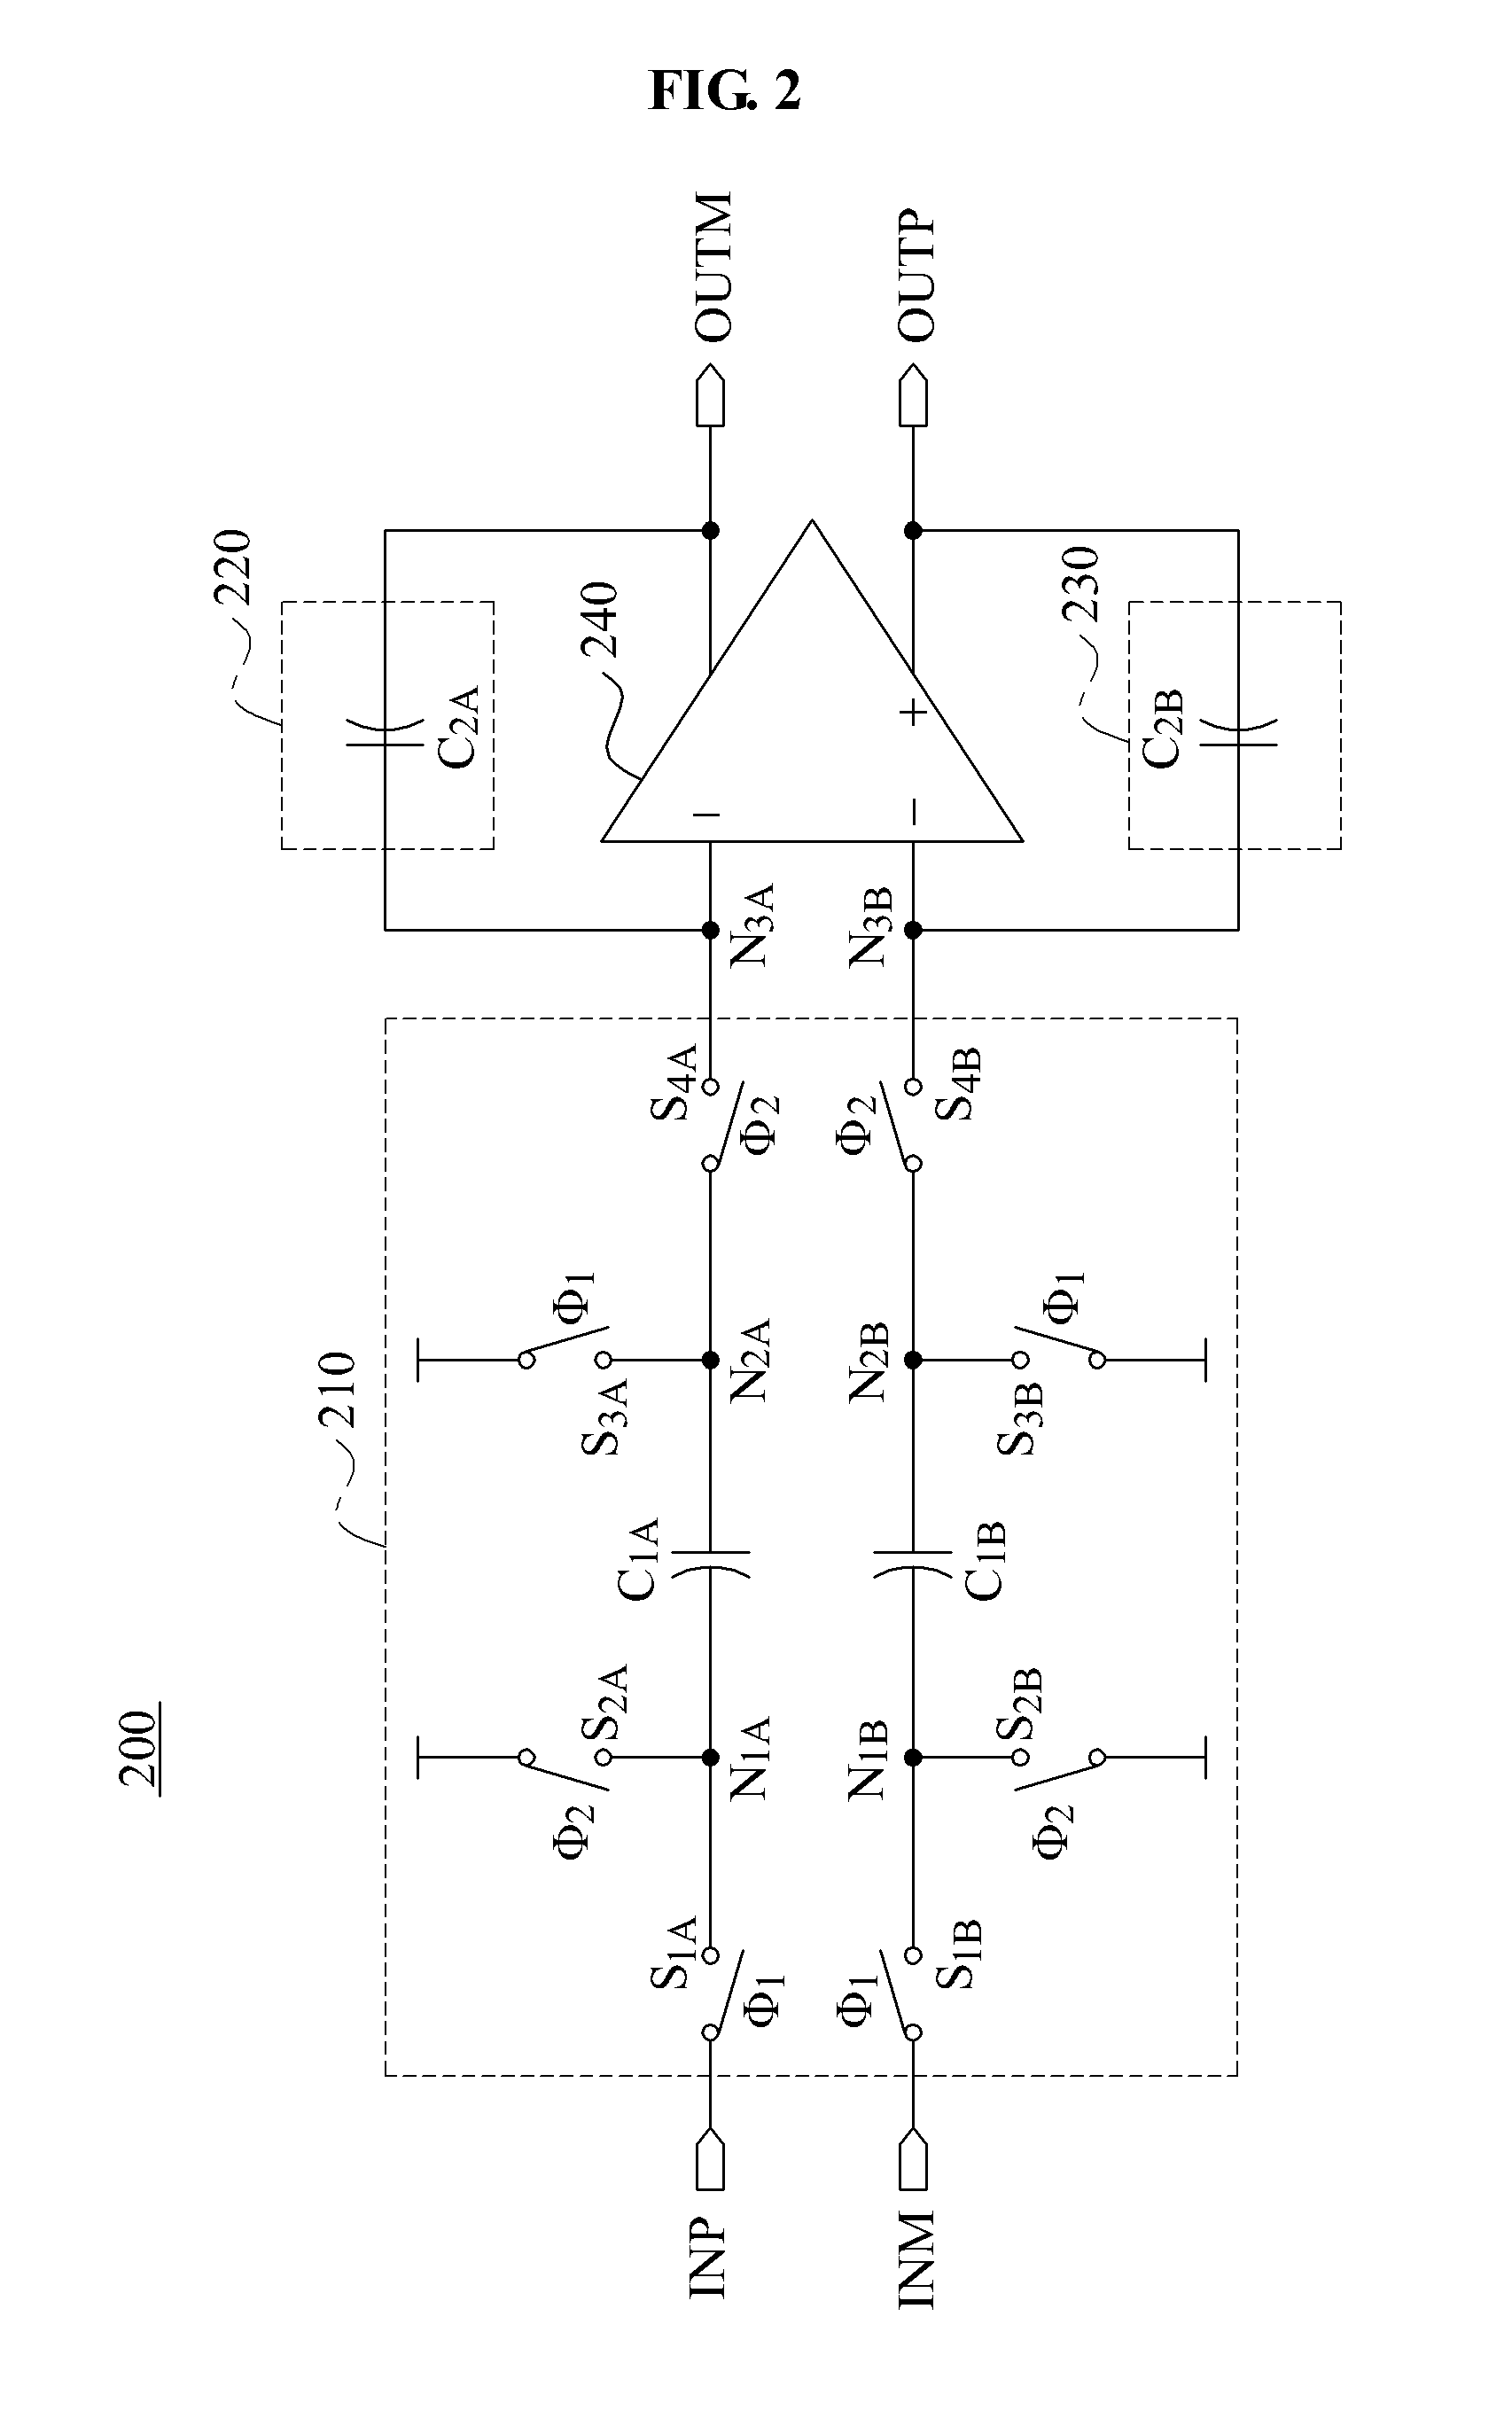 Switched capacitor circuit